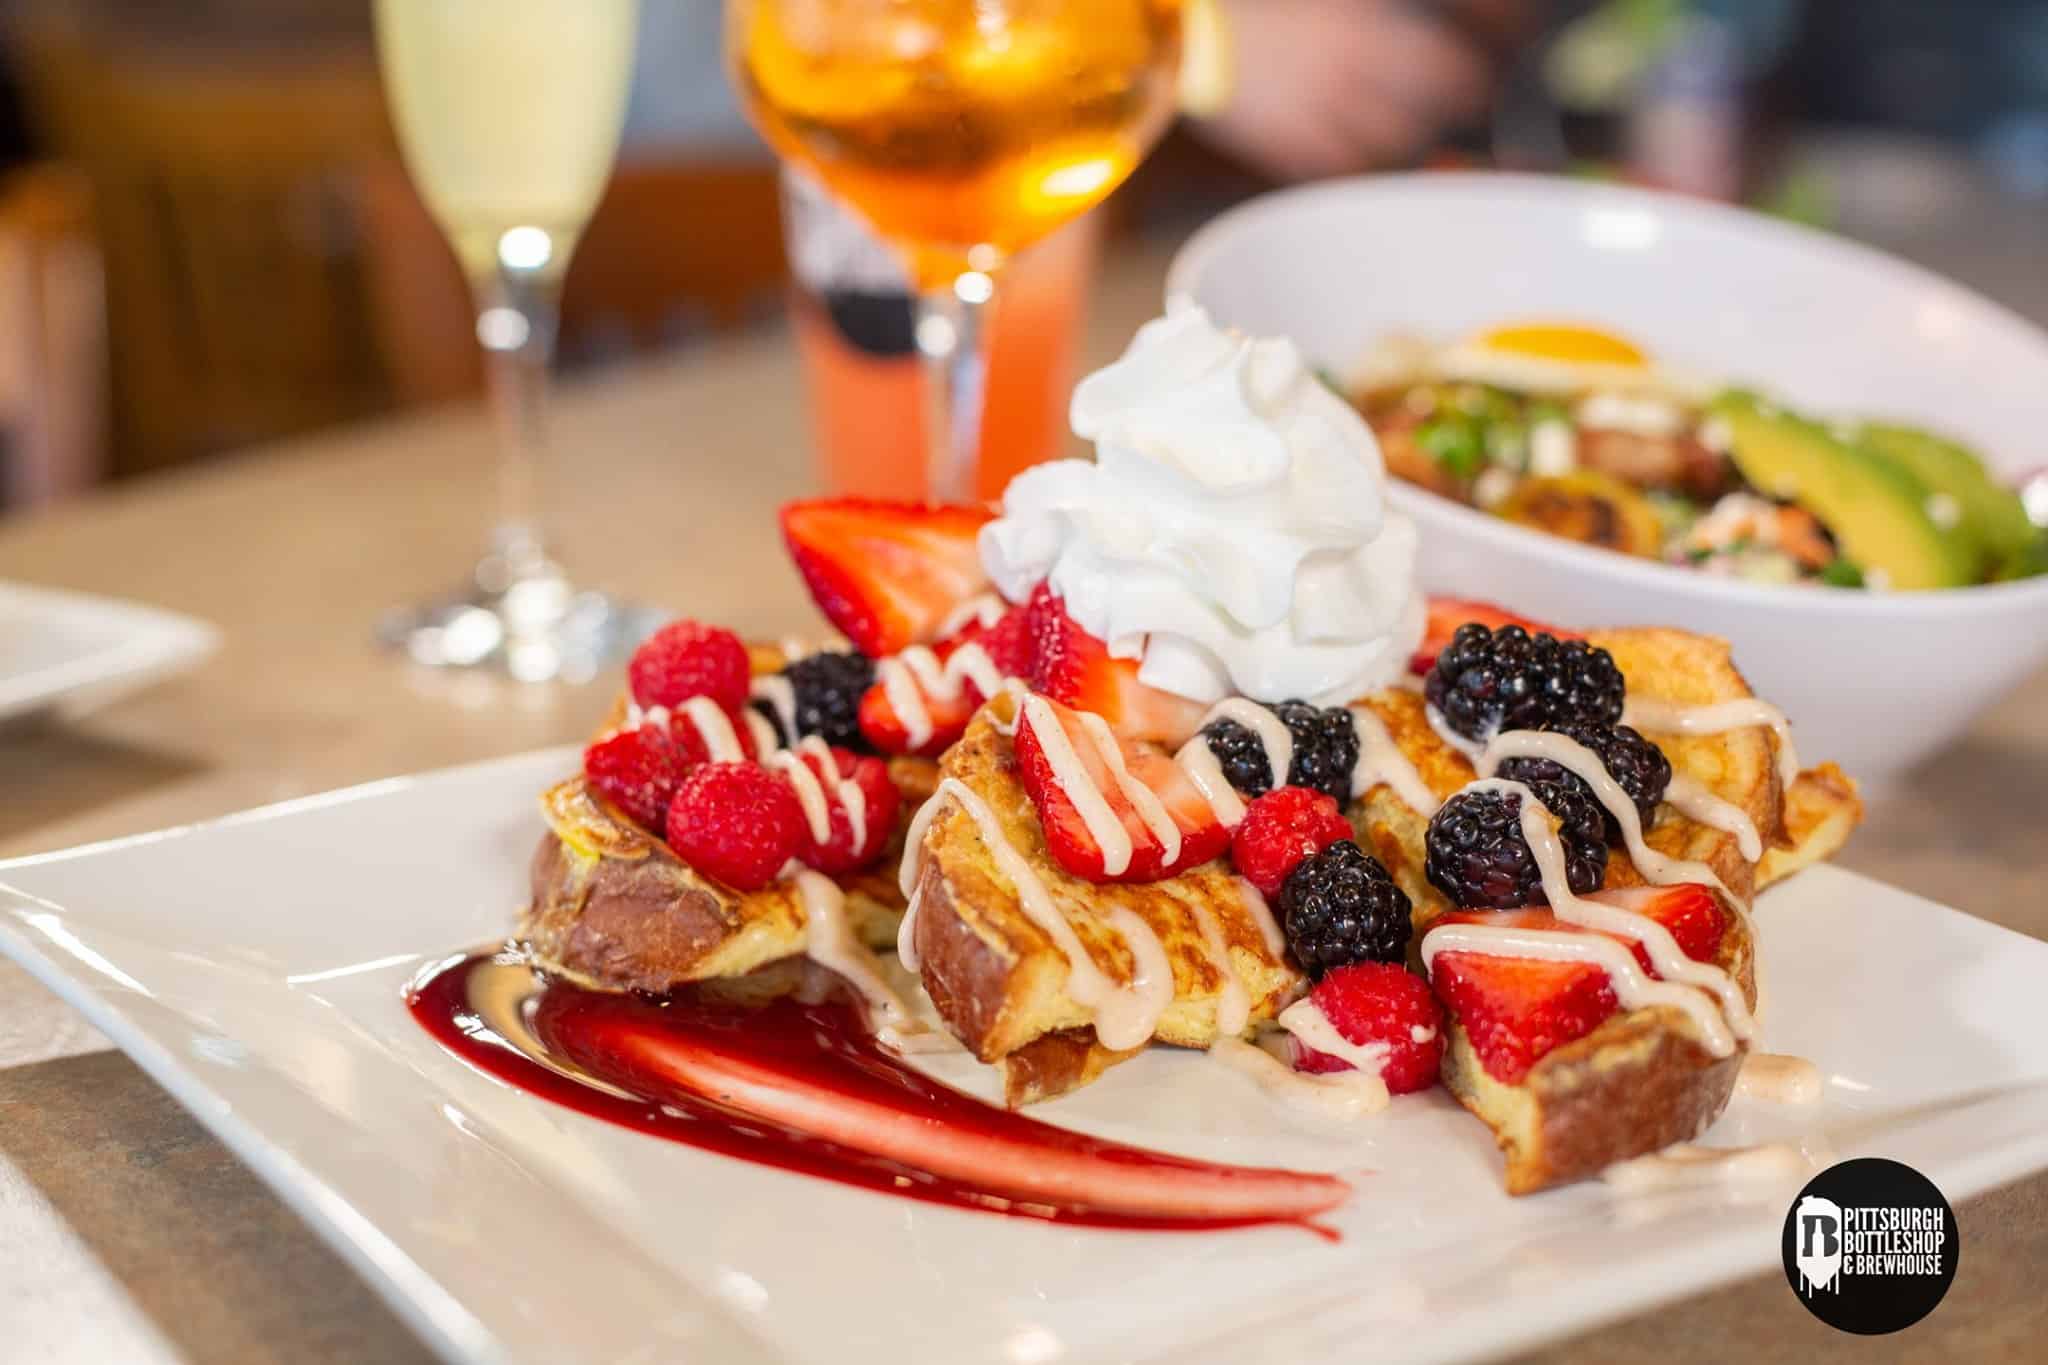 10 New Places to Get Brunch This Fall